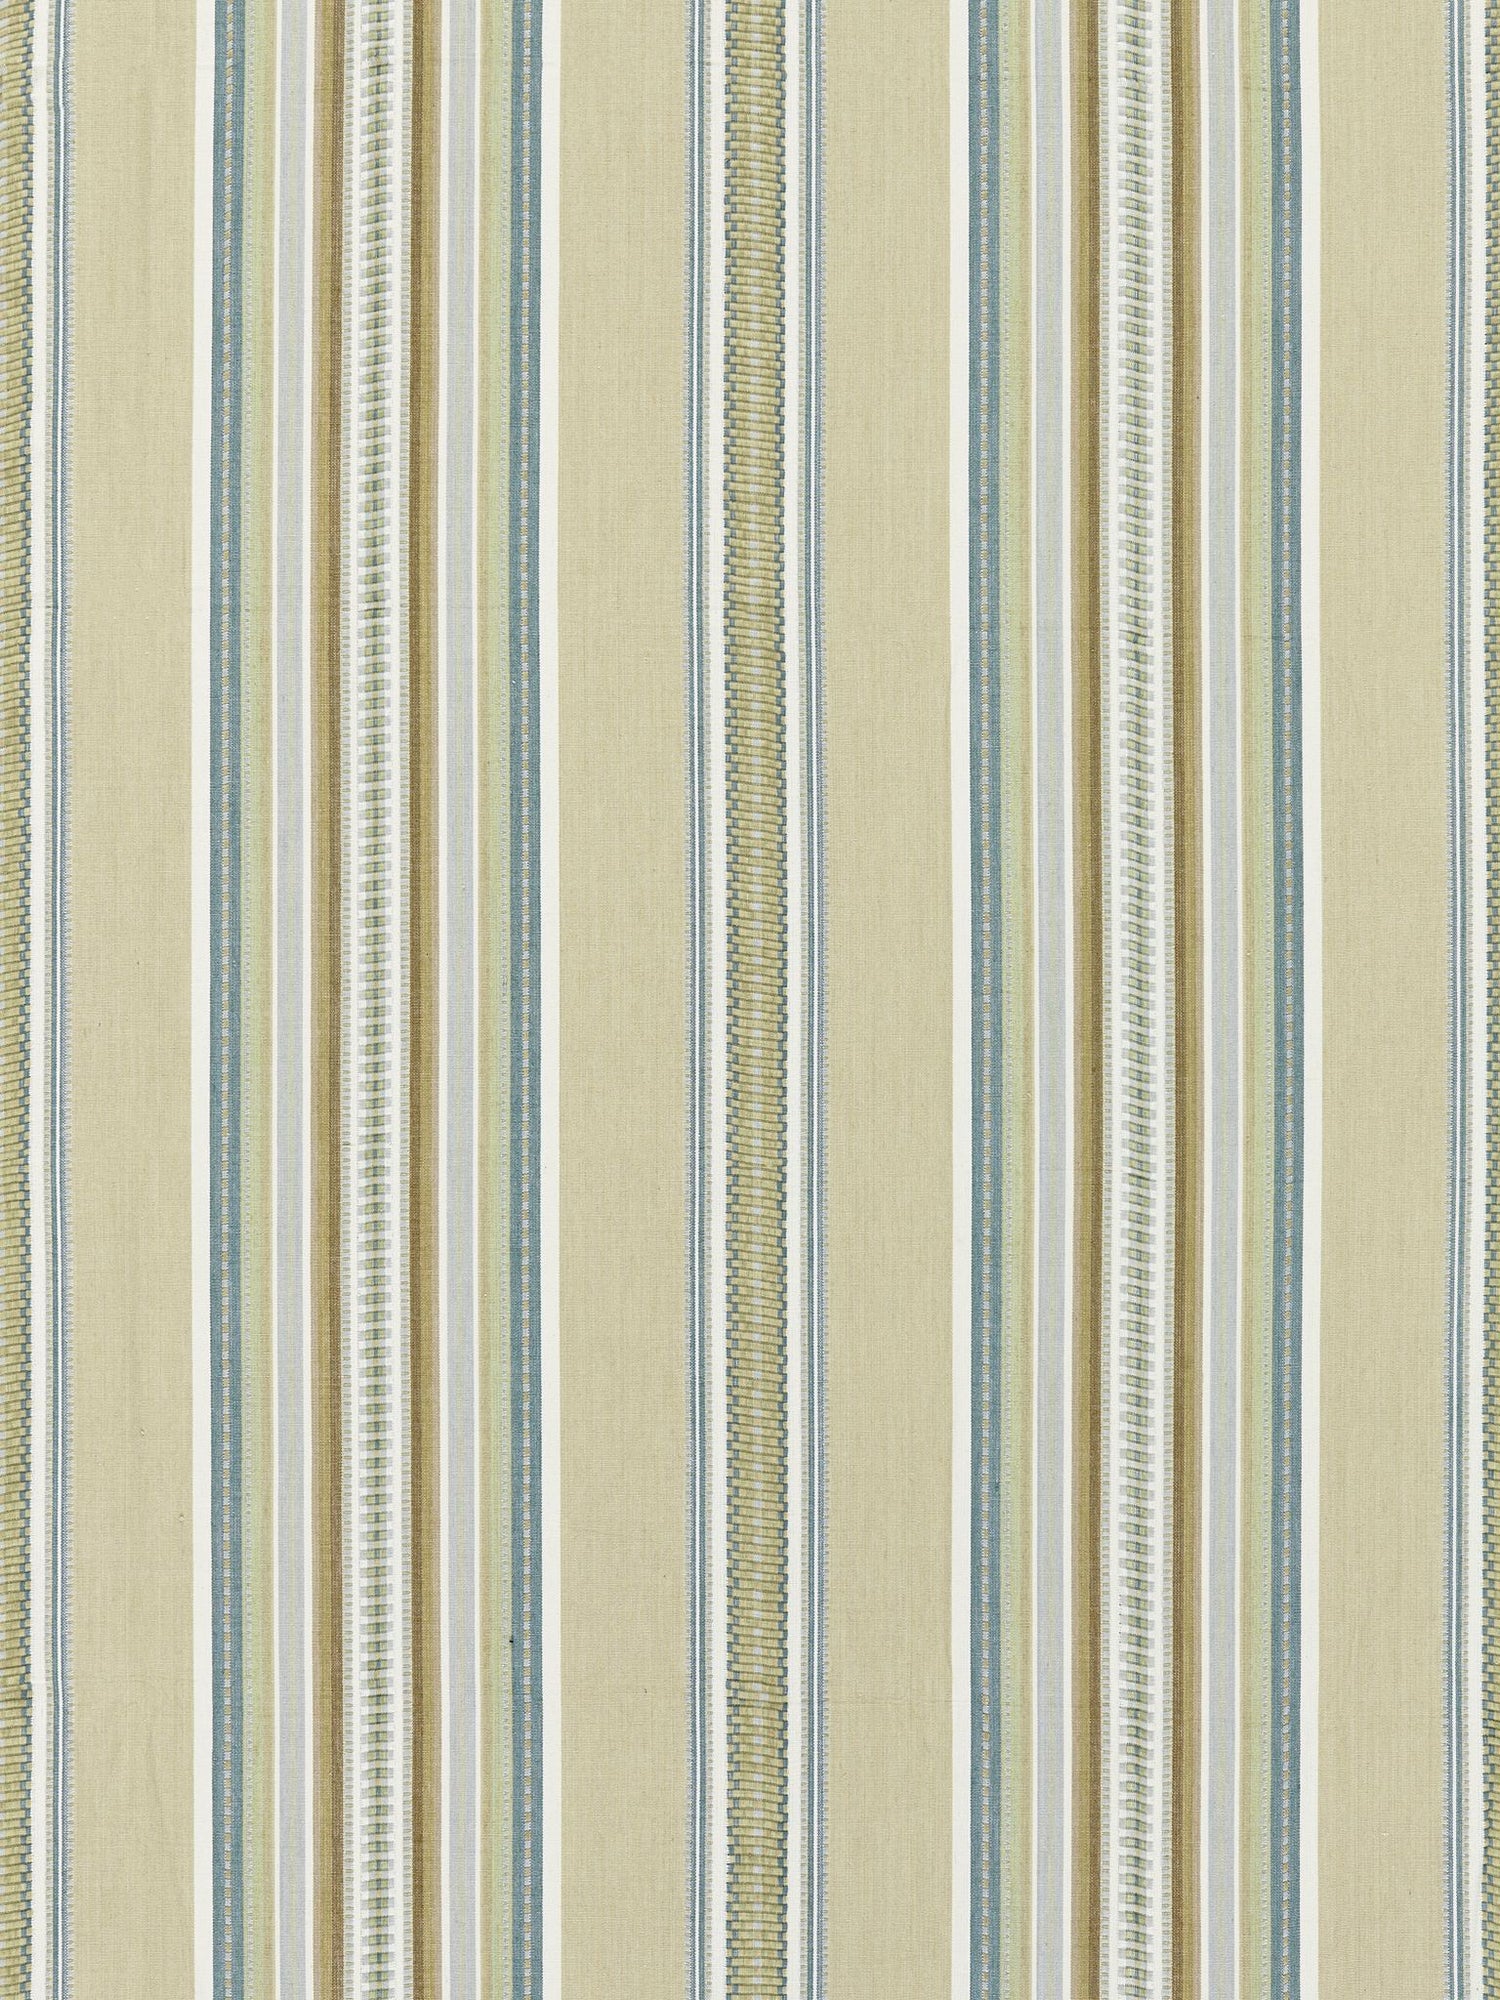 Cyrus Cotton Stripe fabric in prairie color - pattern number SC 000127180 - by Scalamandre in the Scalamandre Fabrics Book 1 collection